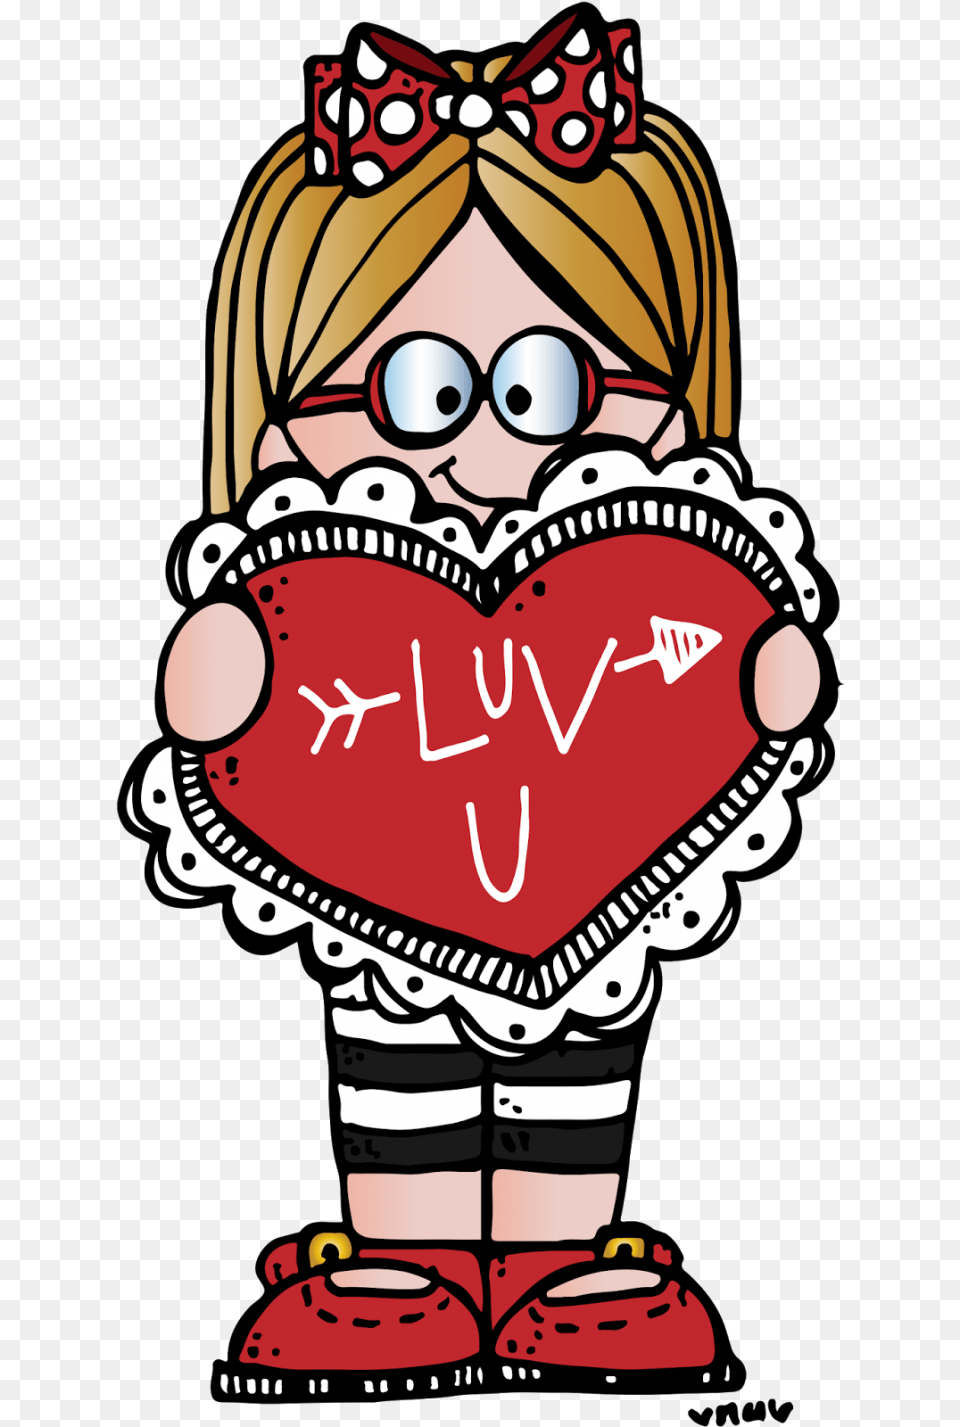 Image Result For February Clip Art Hearts And Flowers, Baby, Person, Accessories, Glasses Free Png